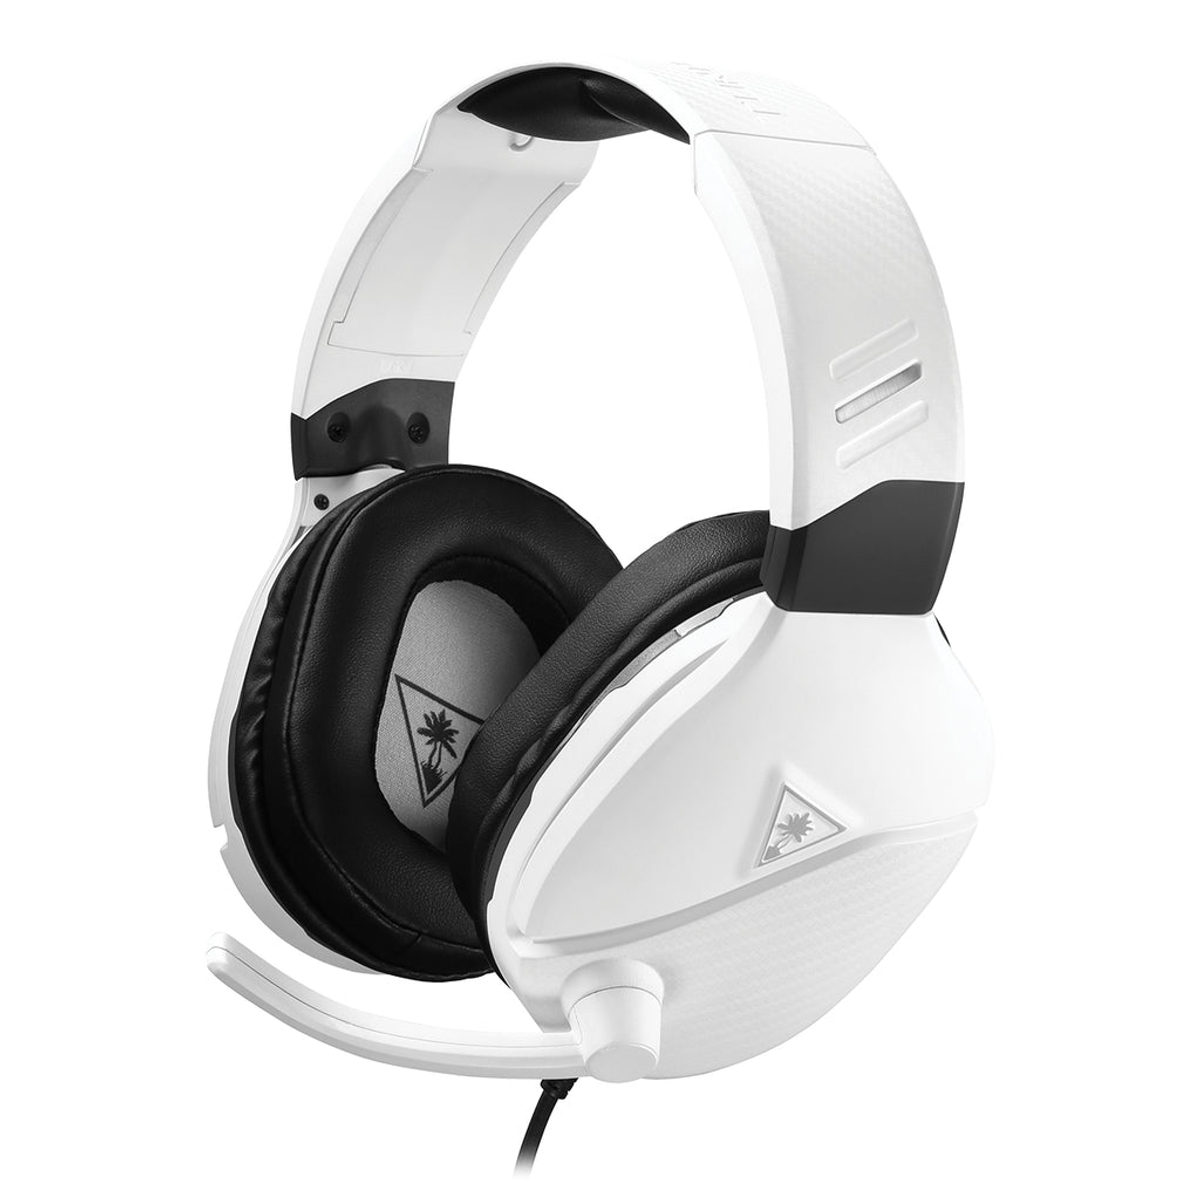 OVER-EAR On-ear TBS-3220-02 200 TURTLE Gaming WH, RECON BEACH Weiß Headset